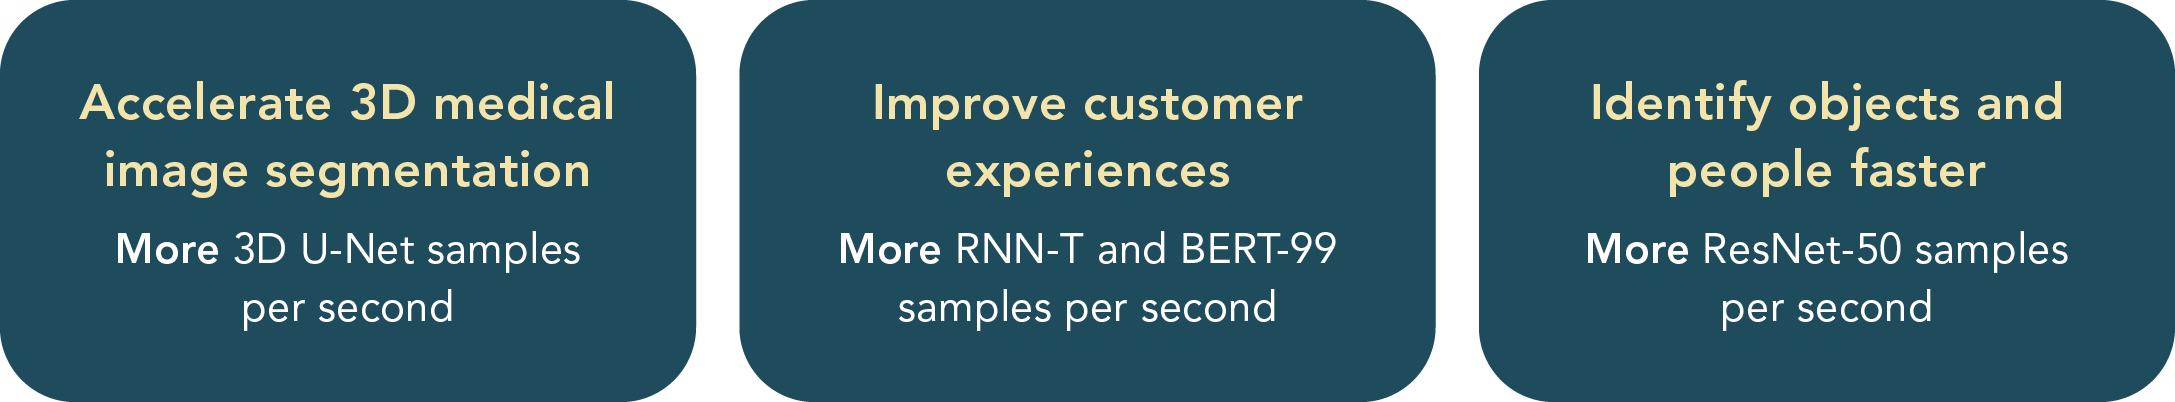 Accelerate 3D medical imaging segmentation. More 3D U-Net samples per second. Improve customer experiences. More RNN-T and Bert-99 samples per second. Identify objects and people faster. More ResNet-50 samples per second. 